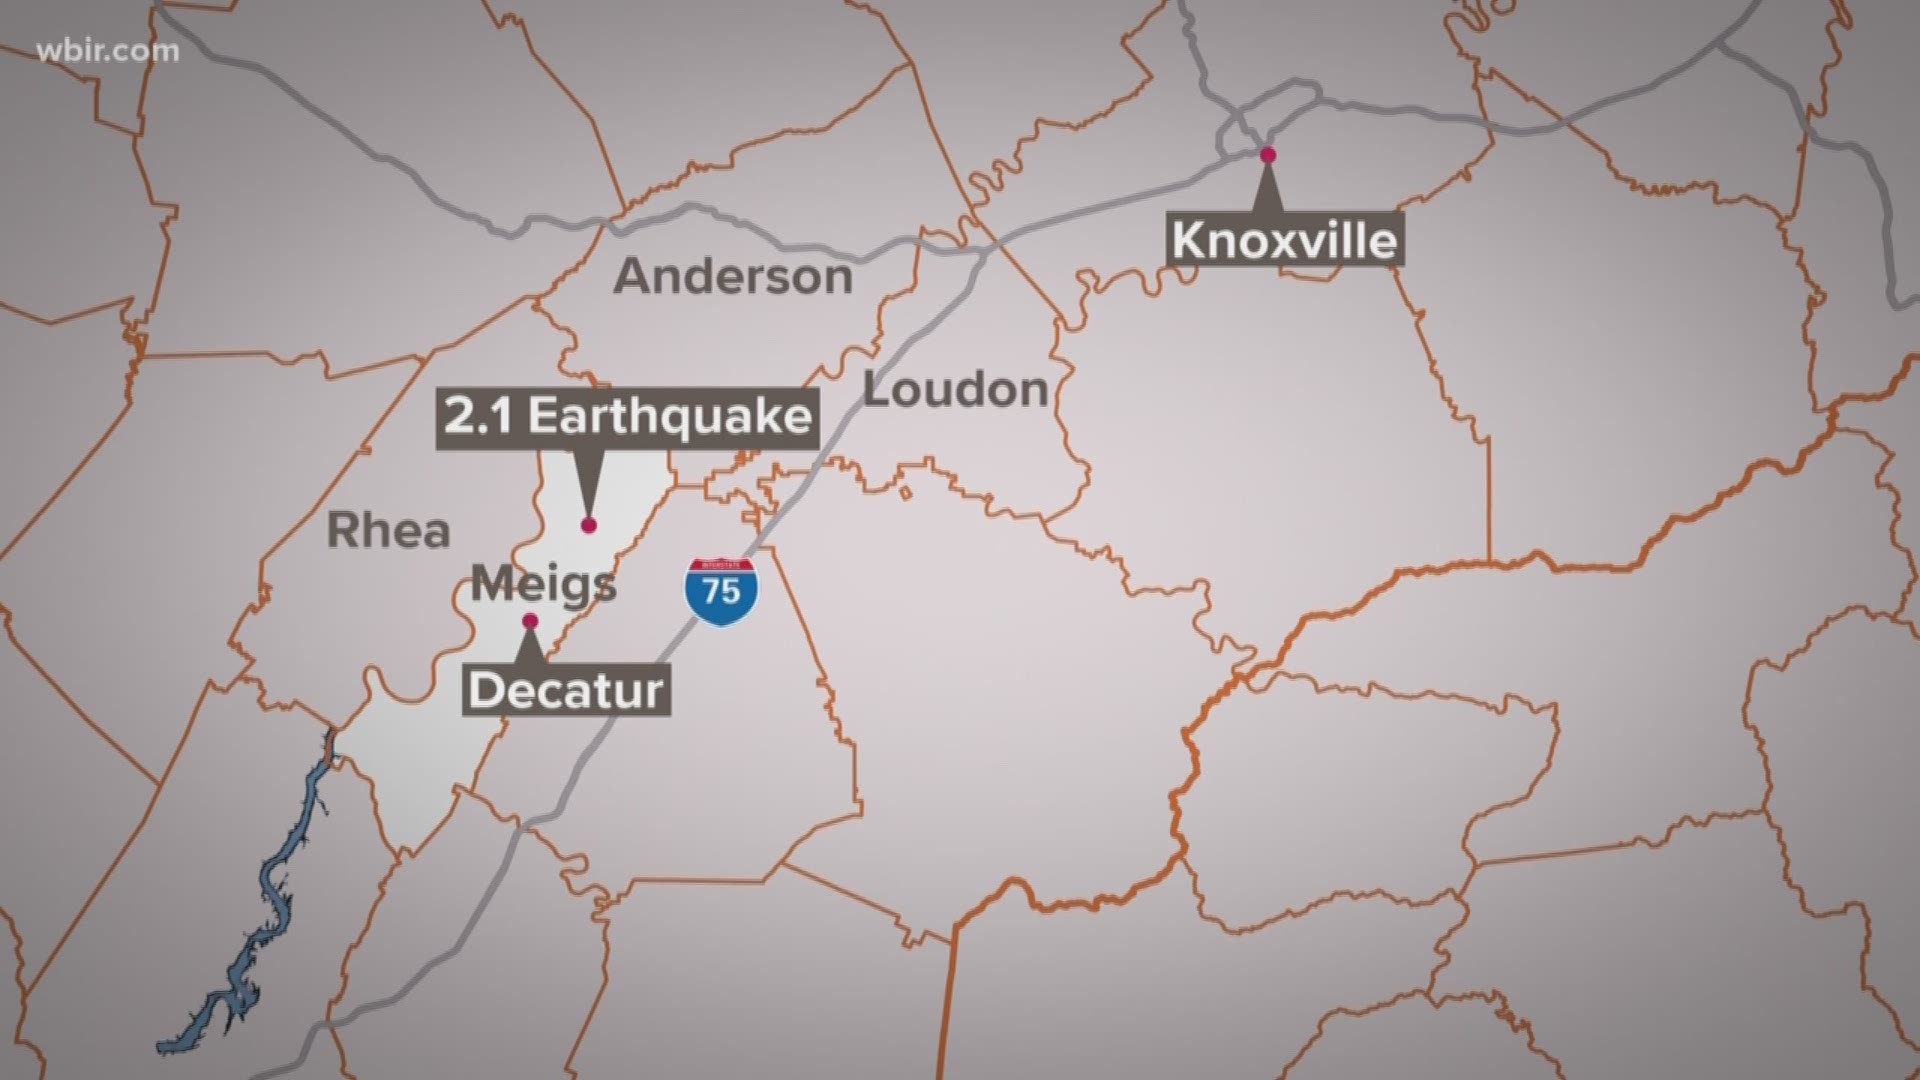 The U.S. Geological Survey says a 2.1 magnitude quake hit near Decatur just after 1 p.m. Wednesday.